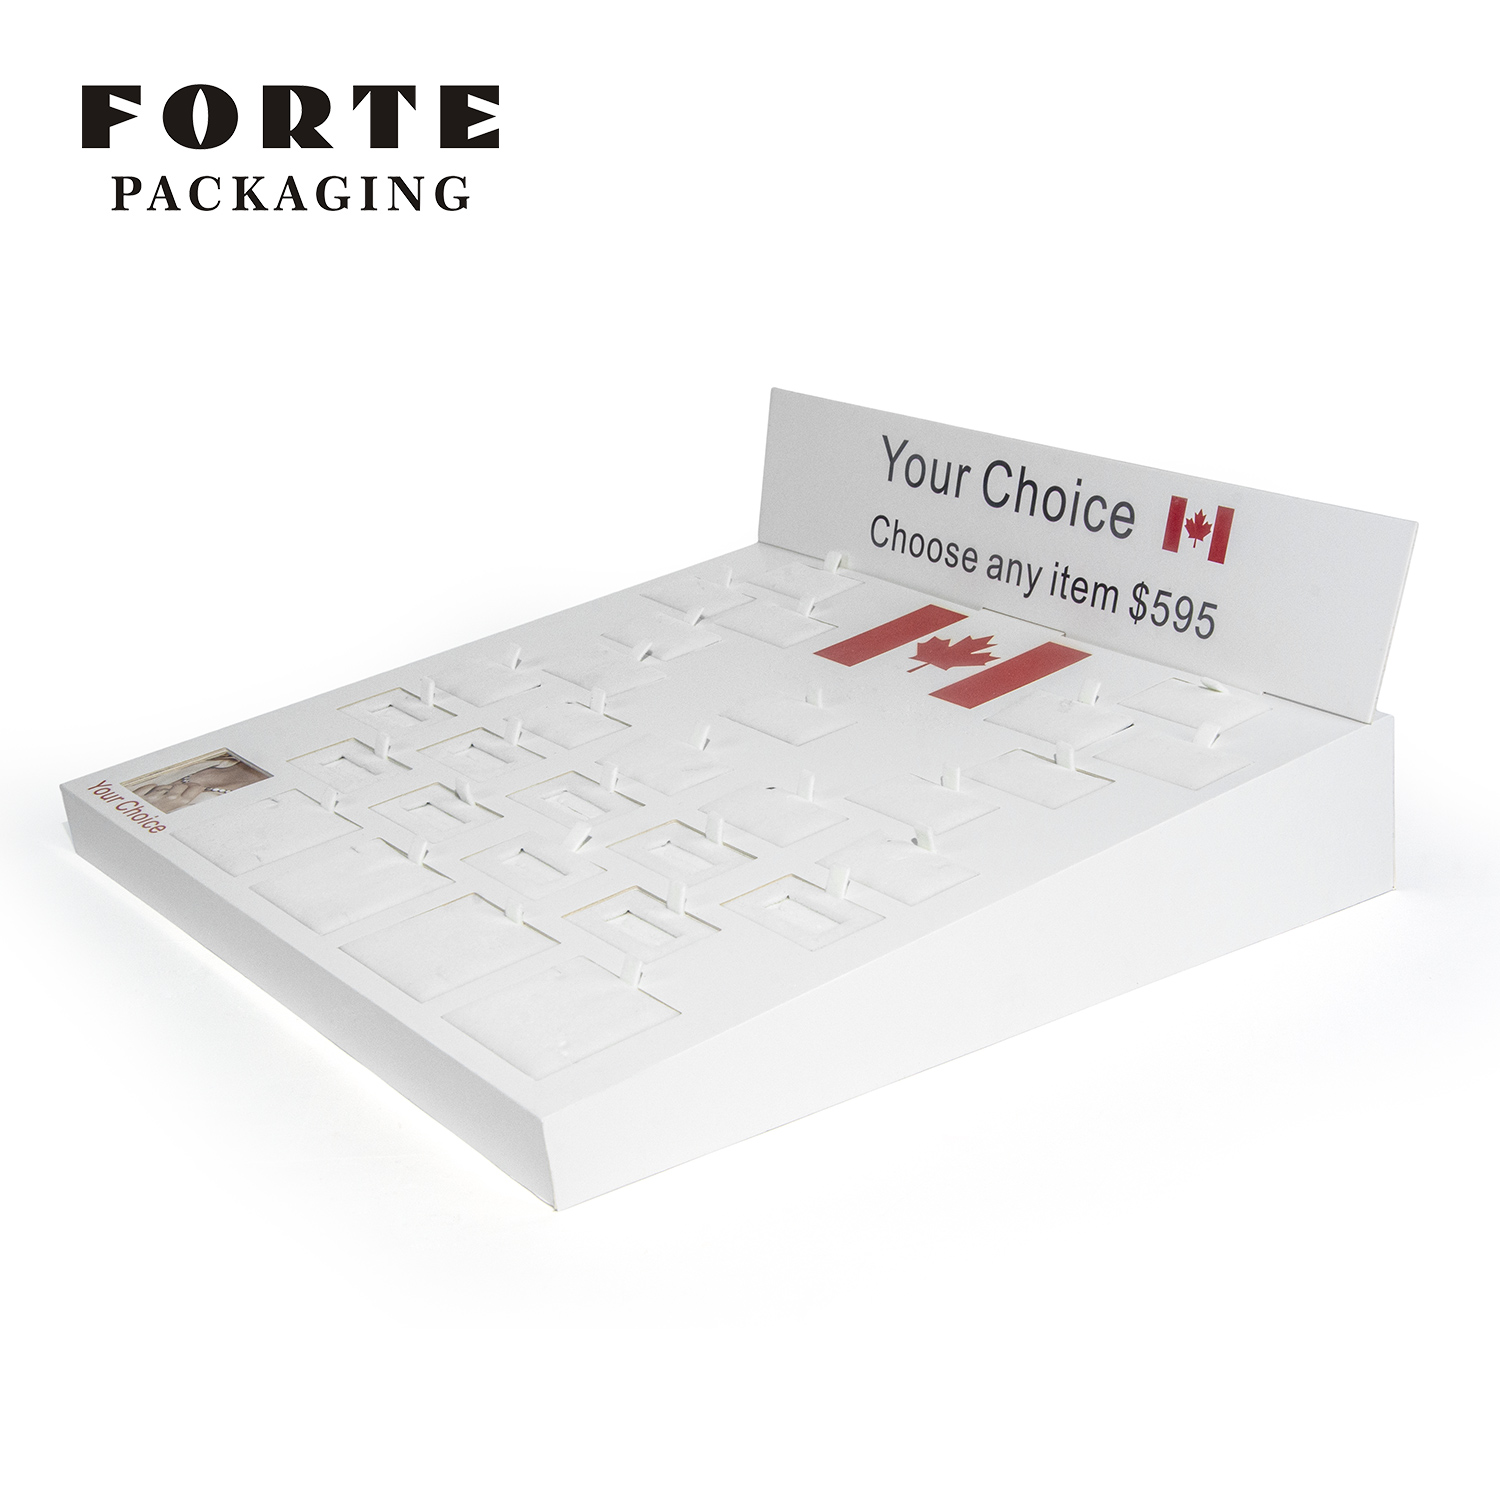 FORTE New Design Jewelry Packaging White Fashion jewelry packaging display customer jewelry display set